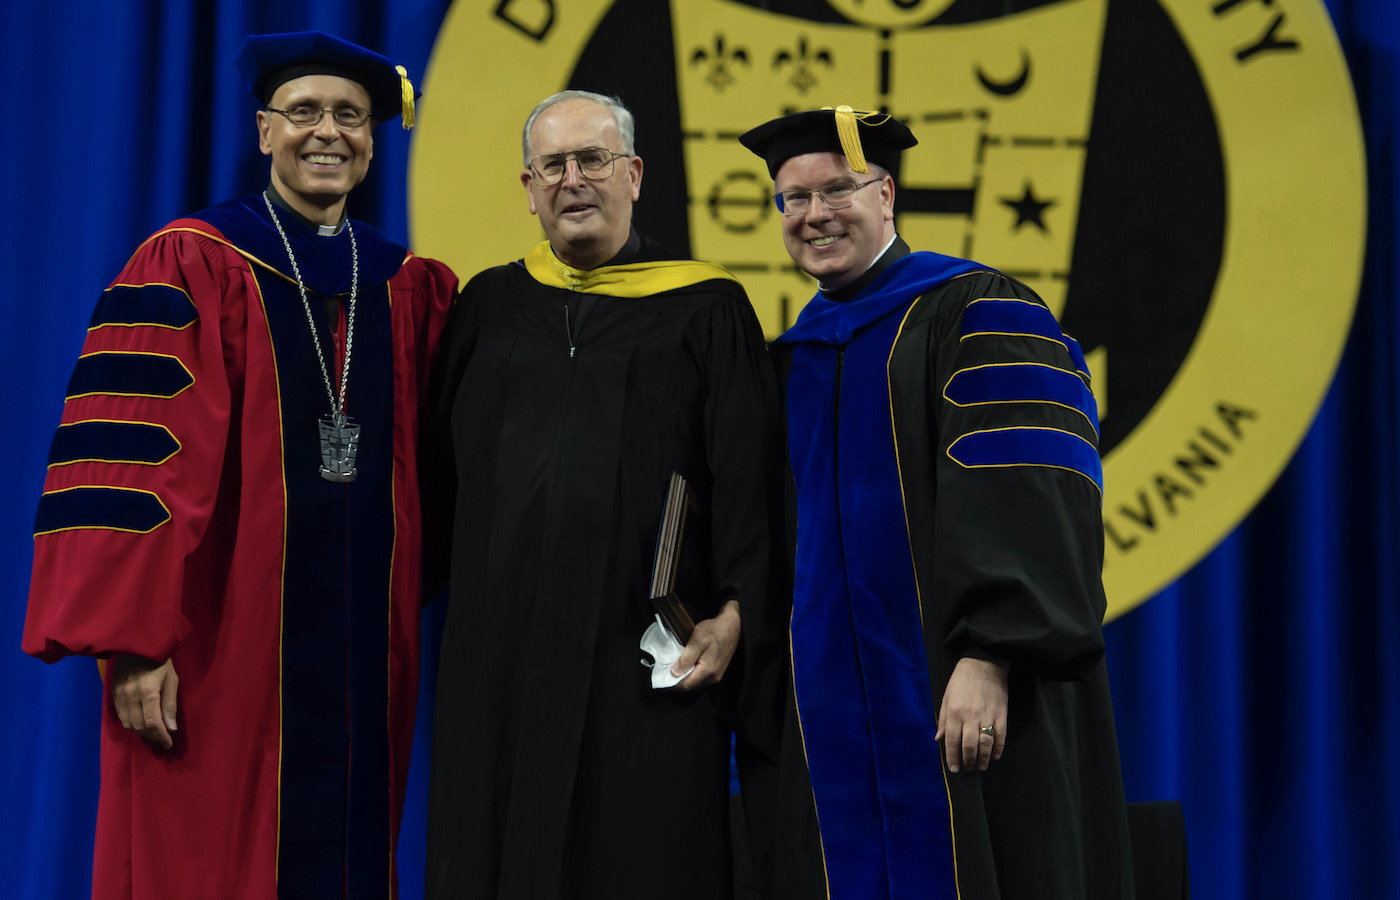 Father James Greenfield, Father Doug Burns, Brother Dan Wisniewski at Commencement 2022 after Fr. Burns received the Provost’s Faculty Excellence Award 